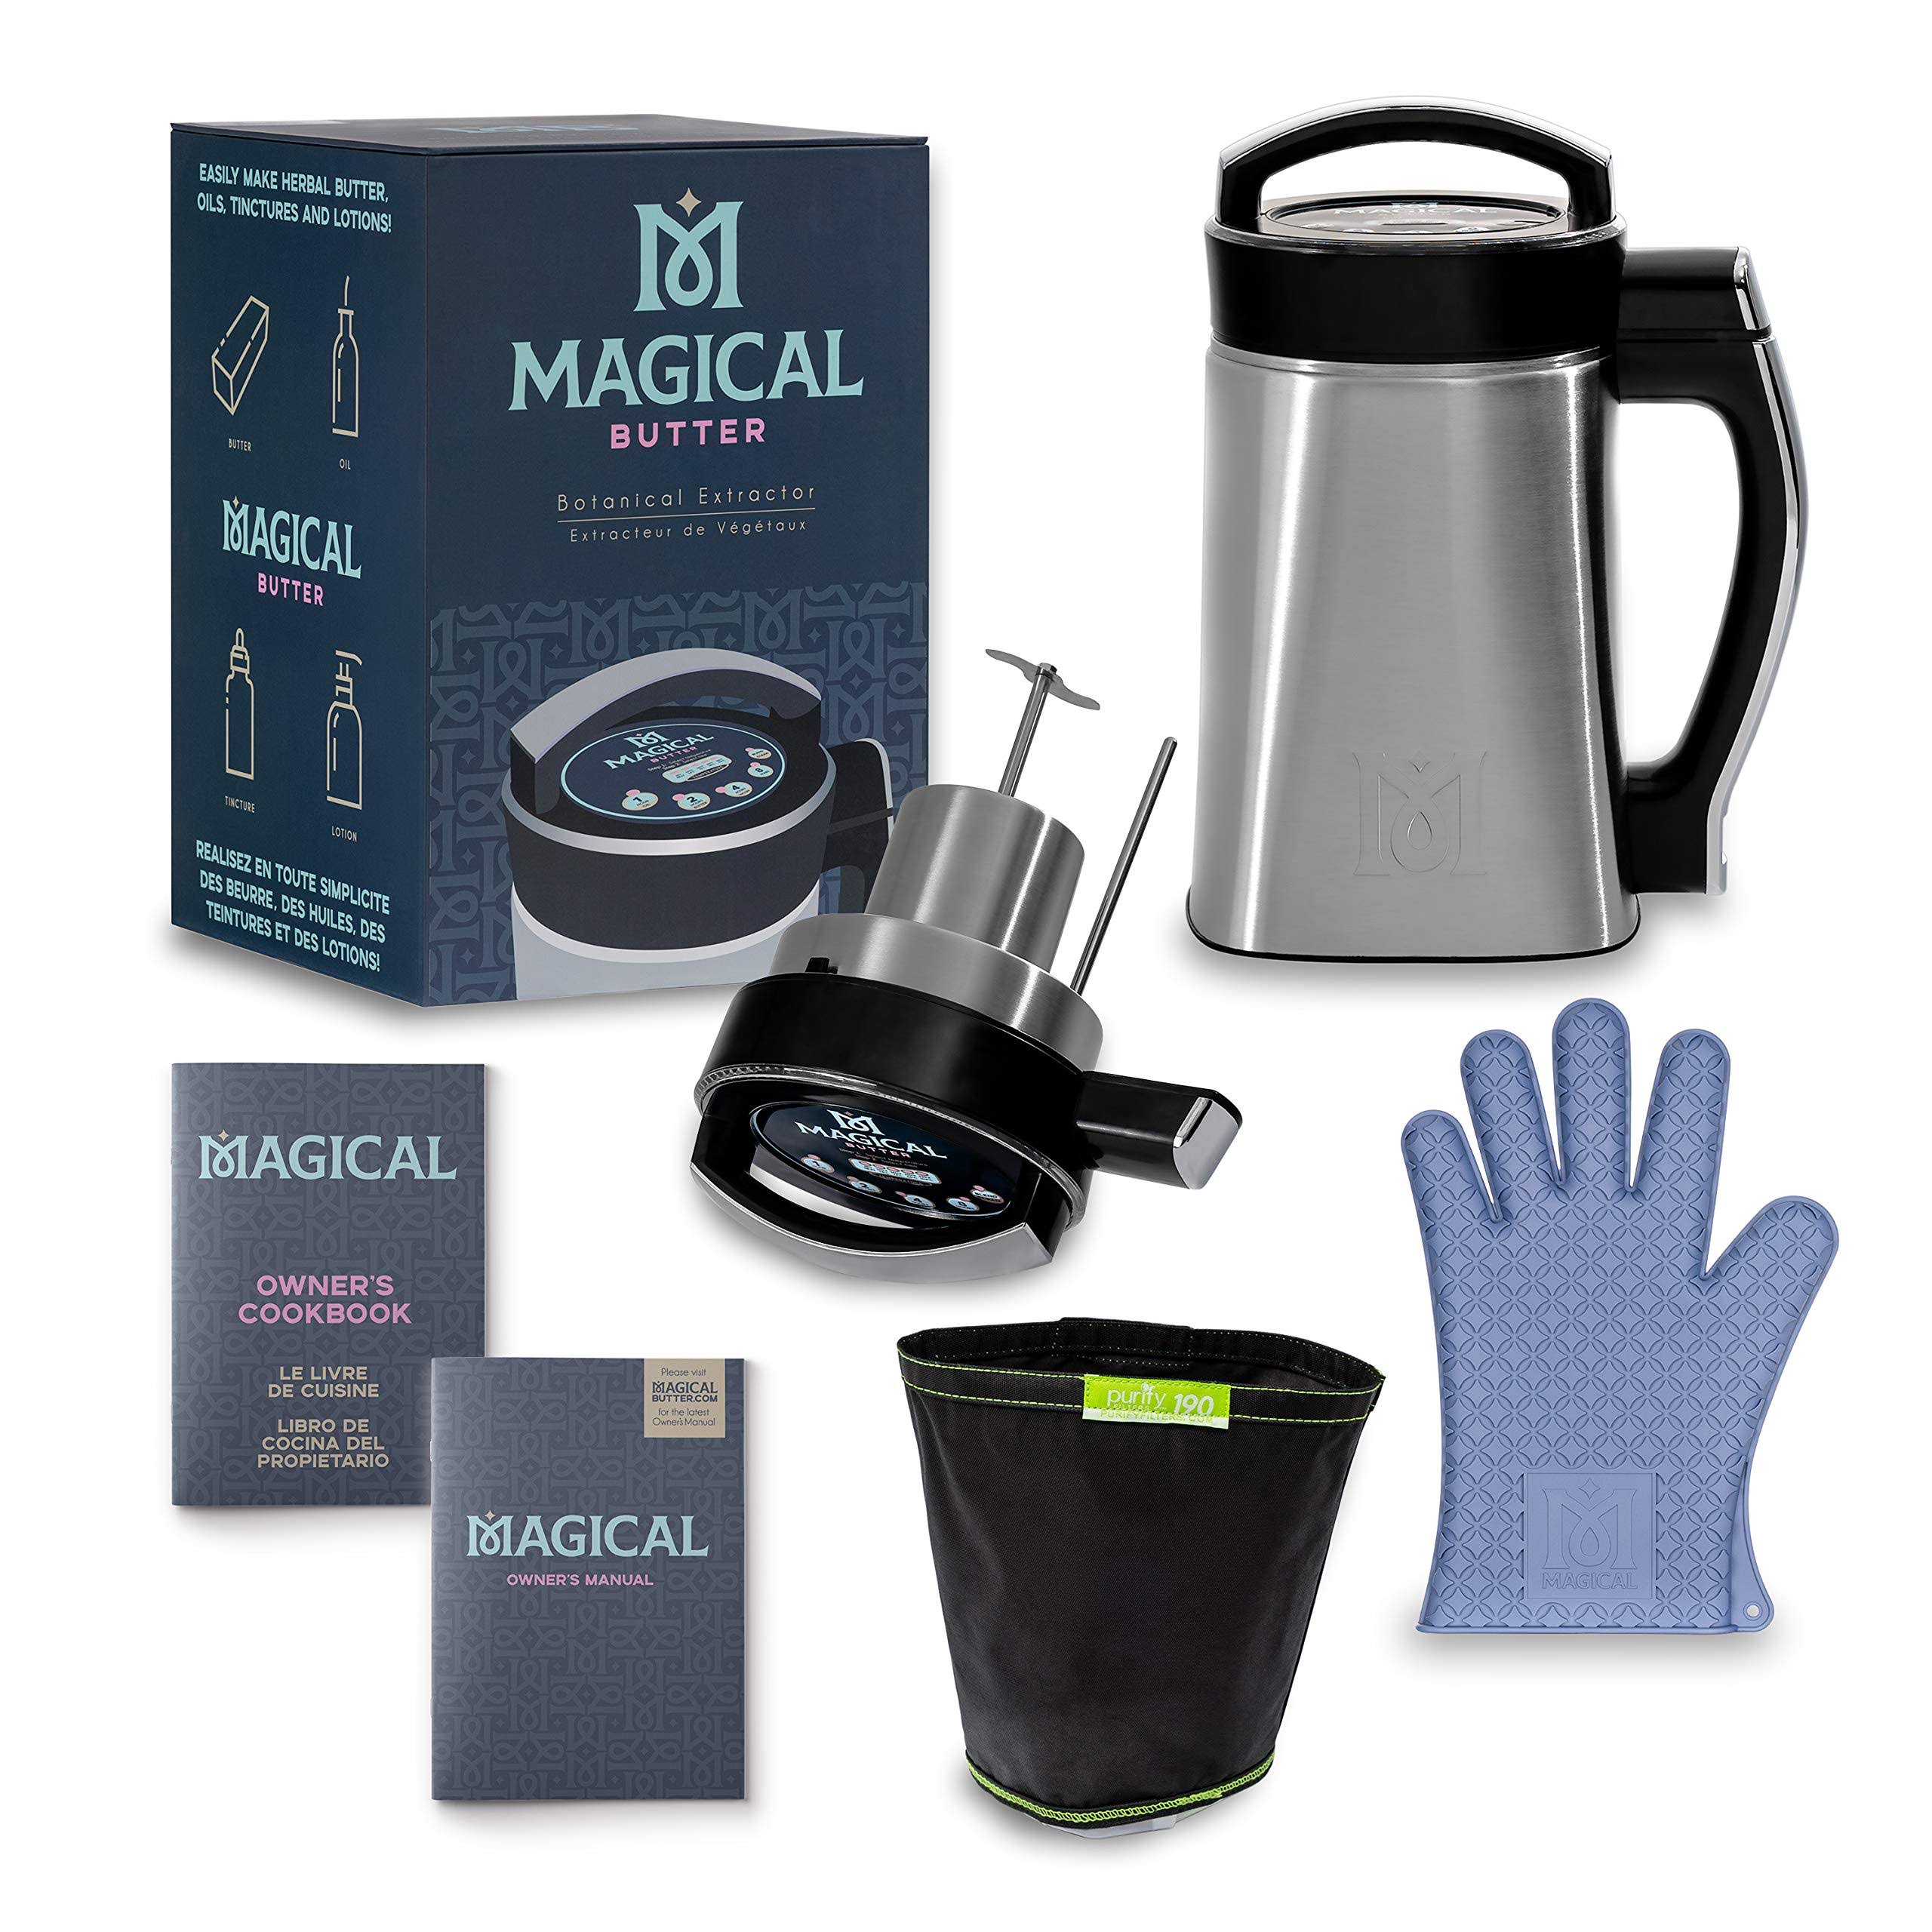 Magical Butter MB2E Botanical Extractor Machine, Black